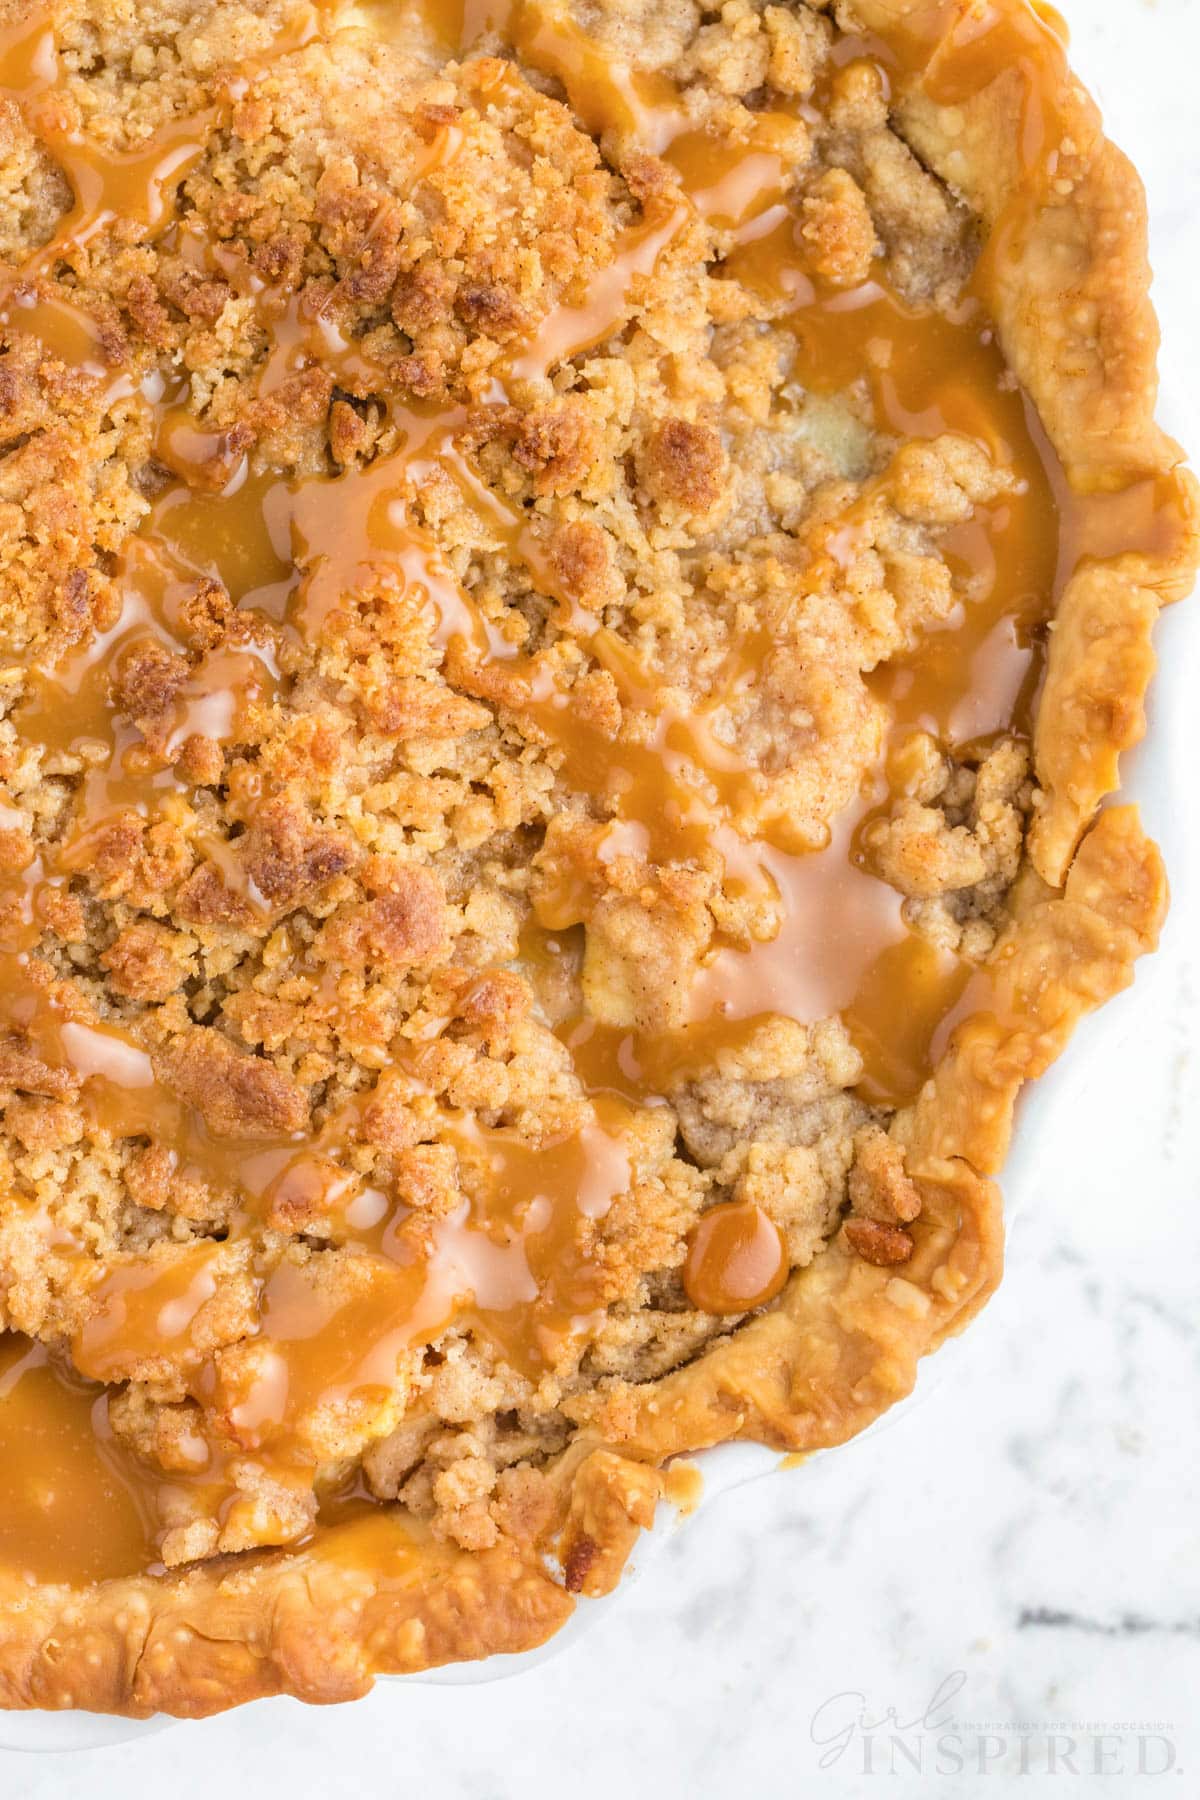 Baked Dutch Caramel Apple Pie with caramel sauce drizzle, on a white marble countertop.